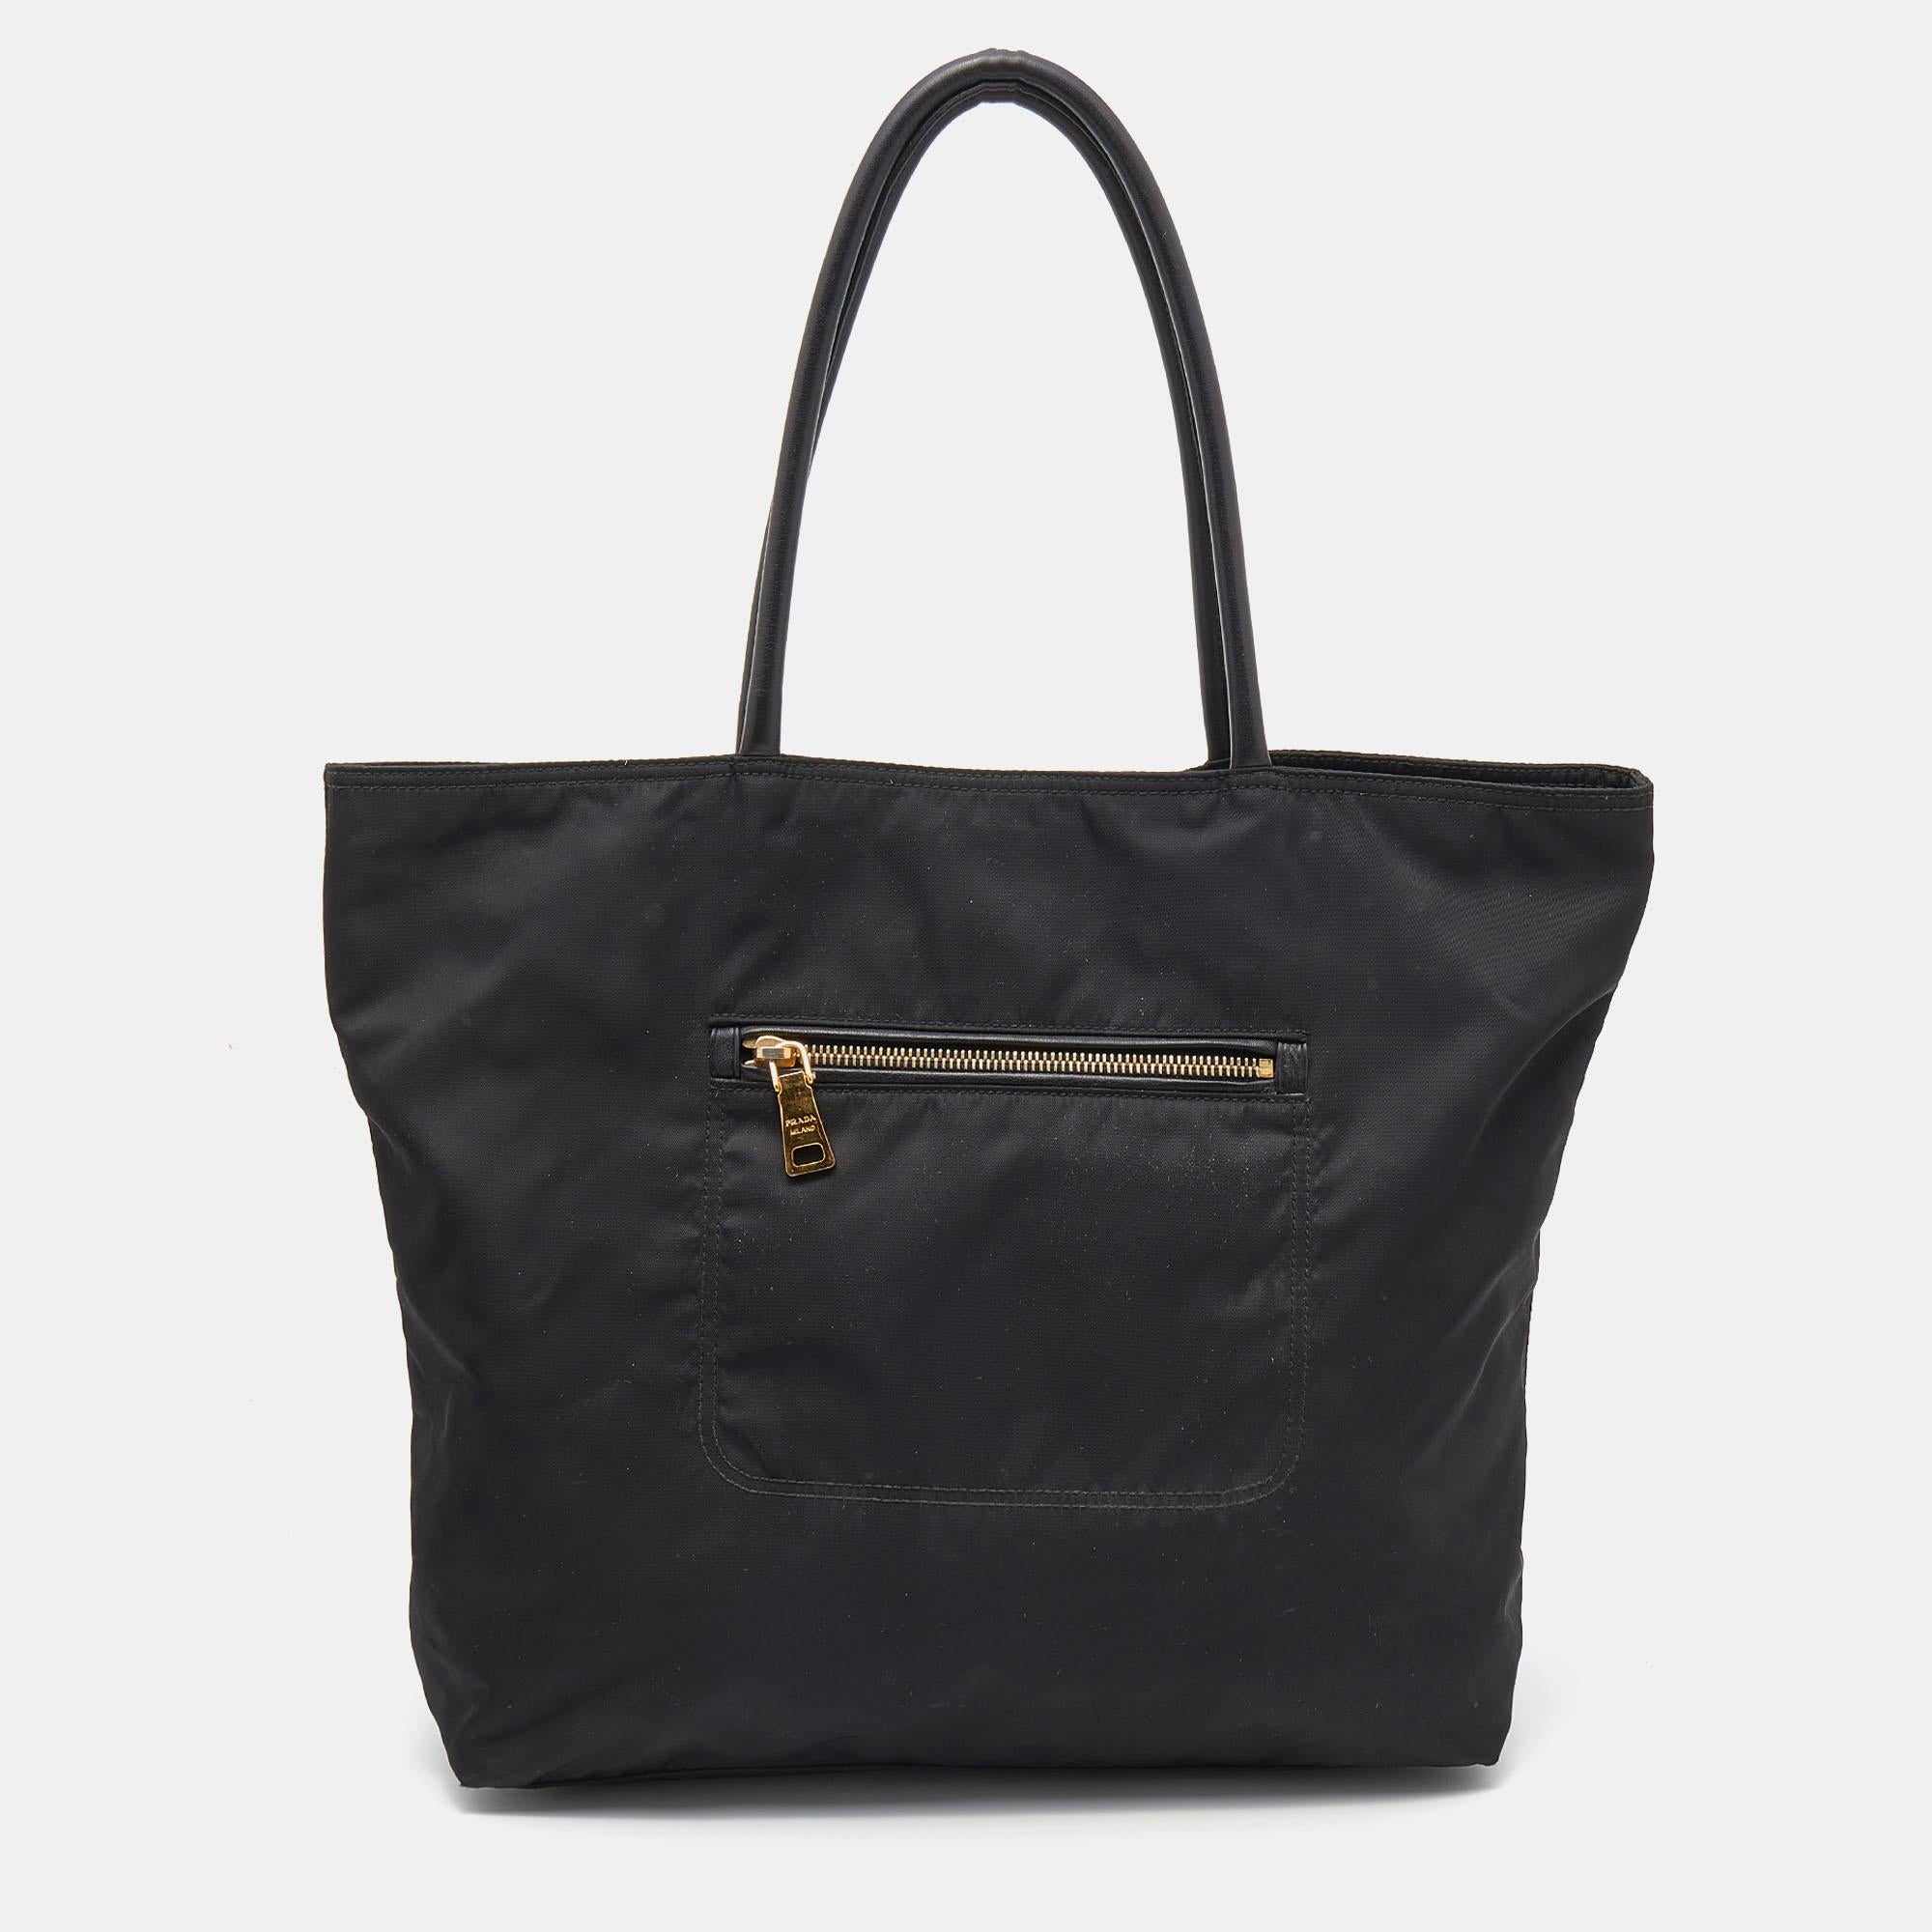 Perfect for work or travel, this Prada tote is made of Tessuto nylon to be classy and durable. It has leather shoulder handles, exterior zip pockets, a brand signature on the front, and a spacious lined interior.

